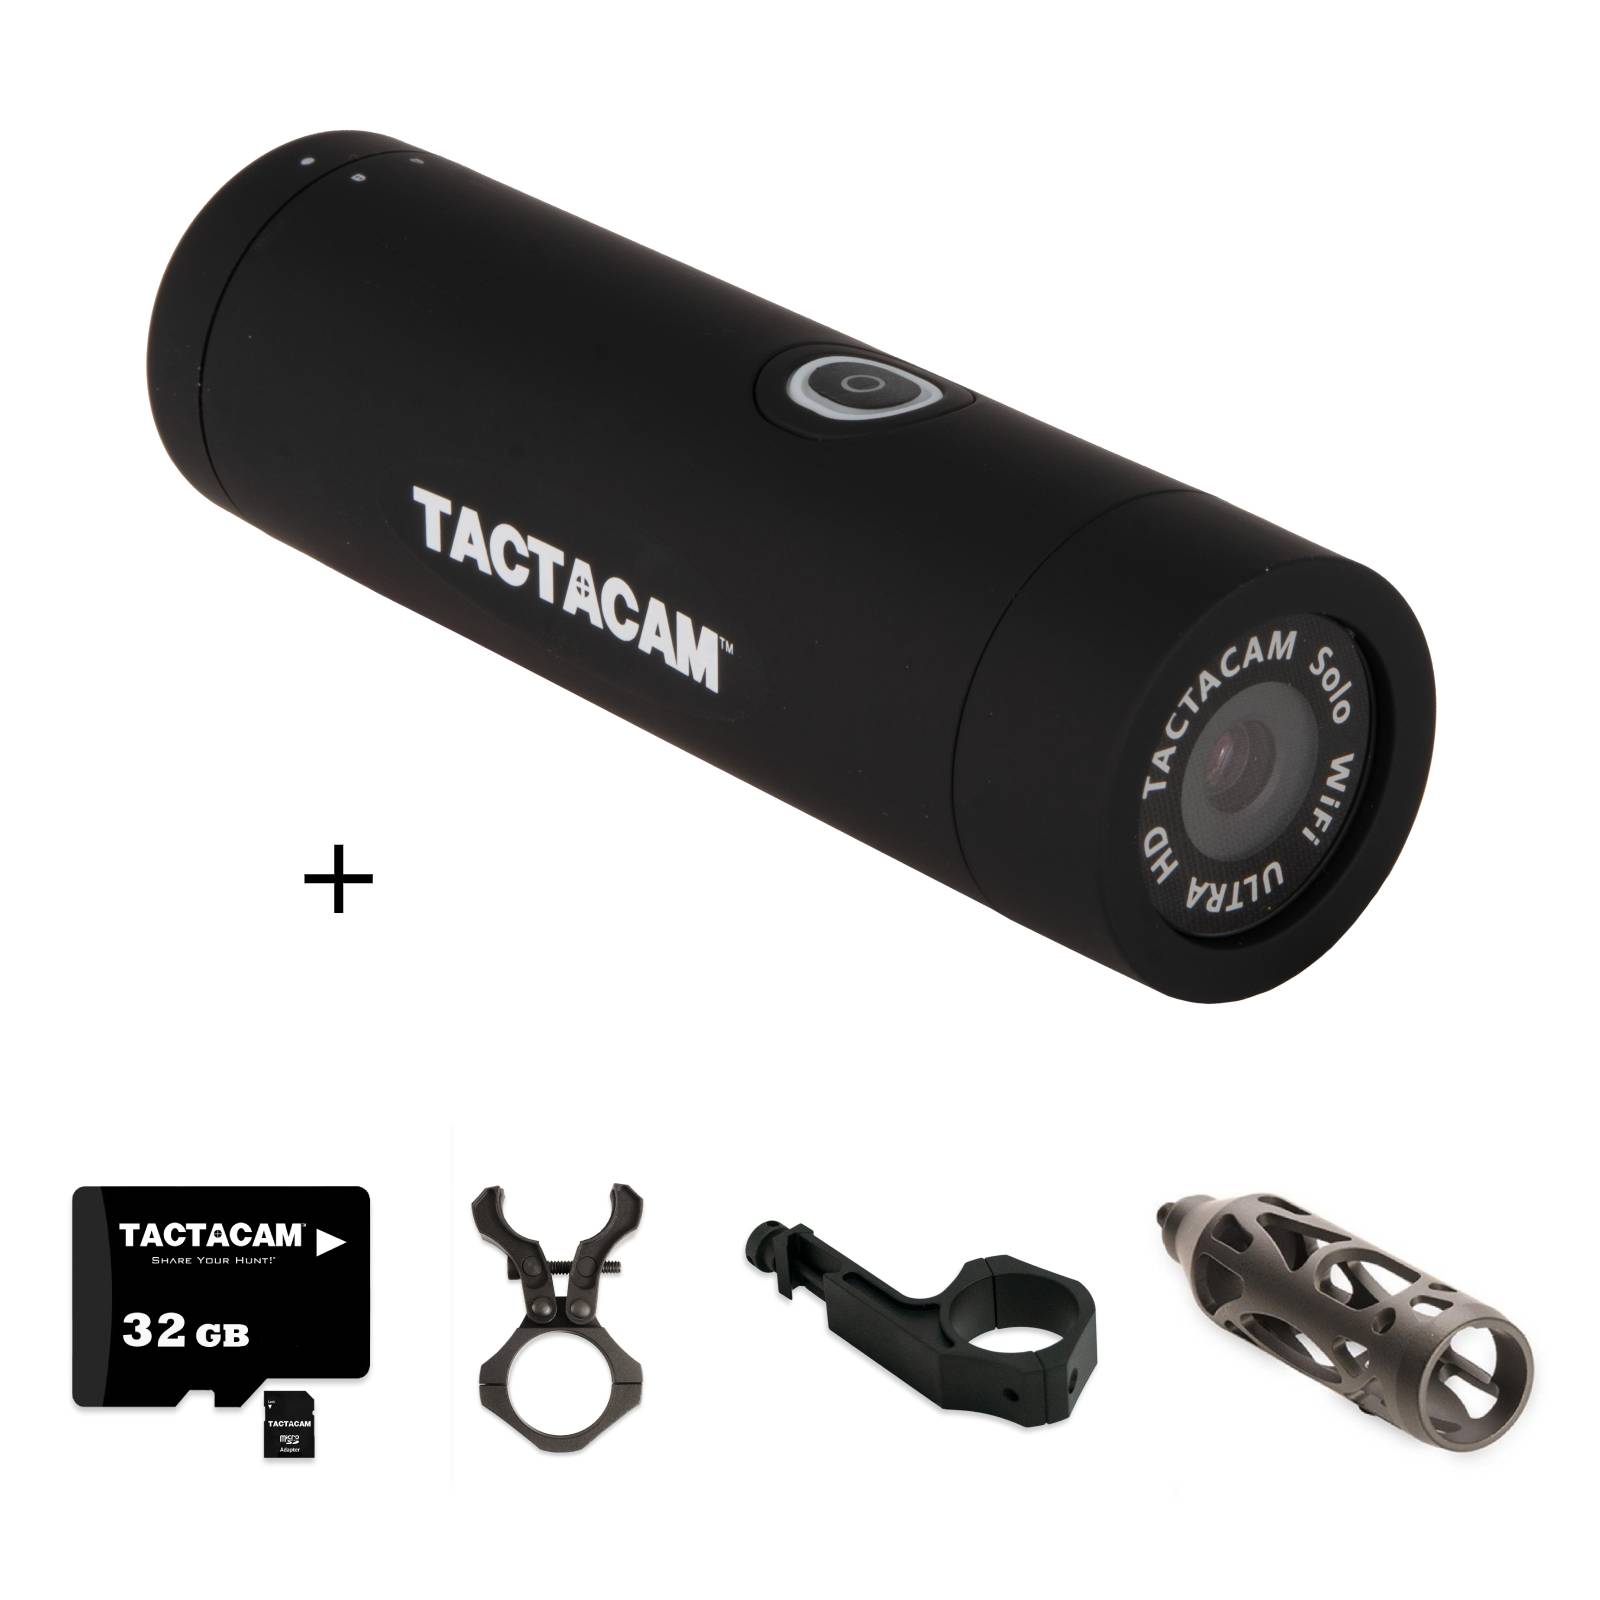 TACTACAM 4.0 bow package-5x Zoom Records in Ultra HD Tactacam App Wi-Fi ready 